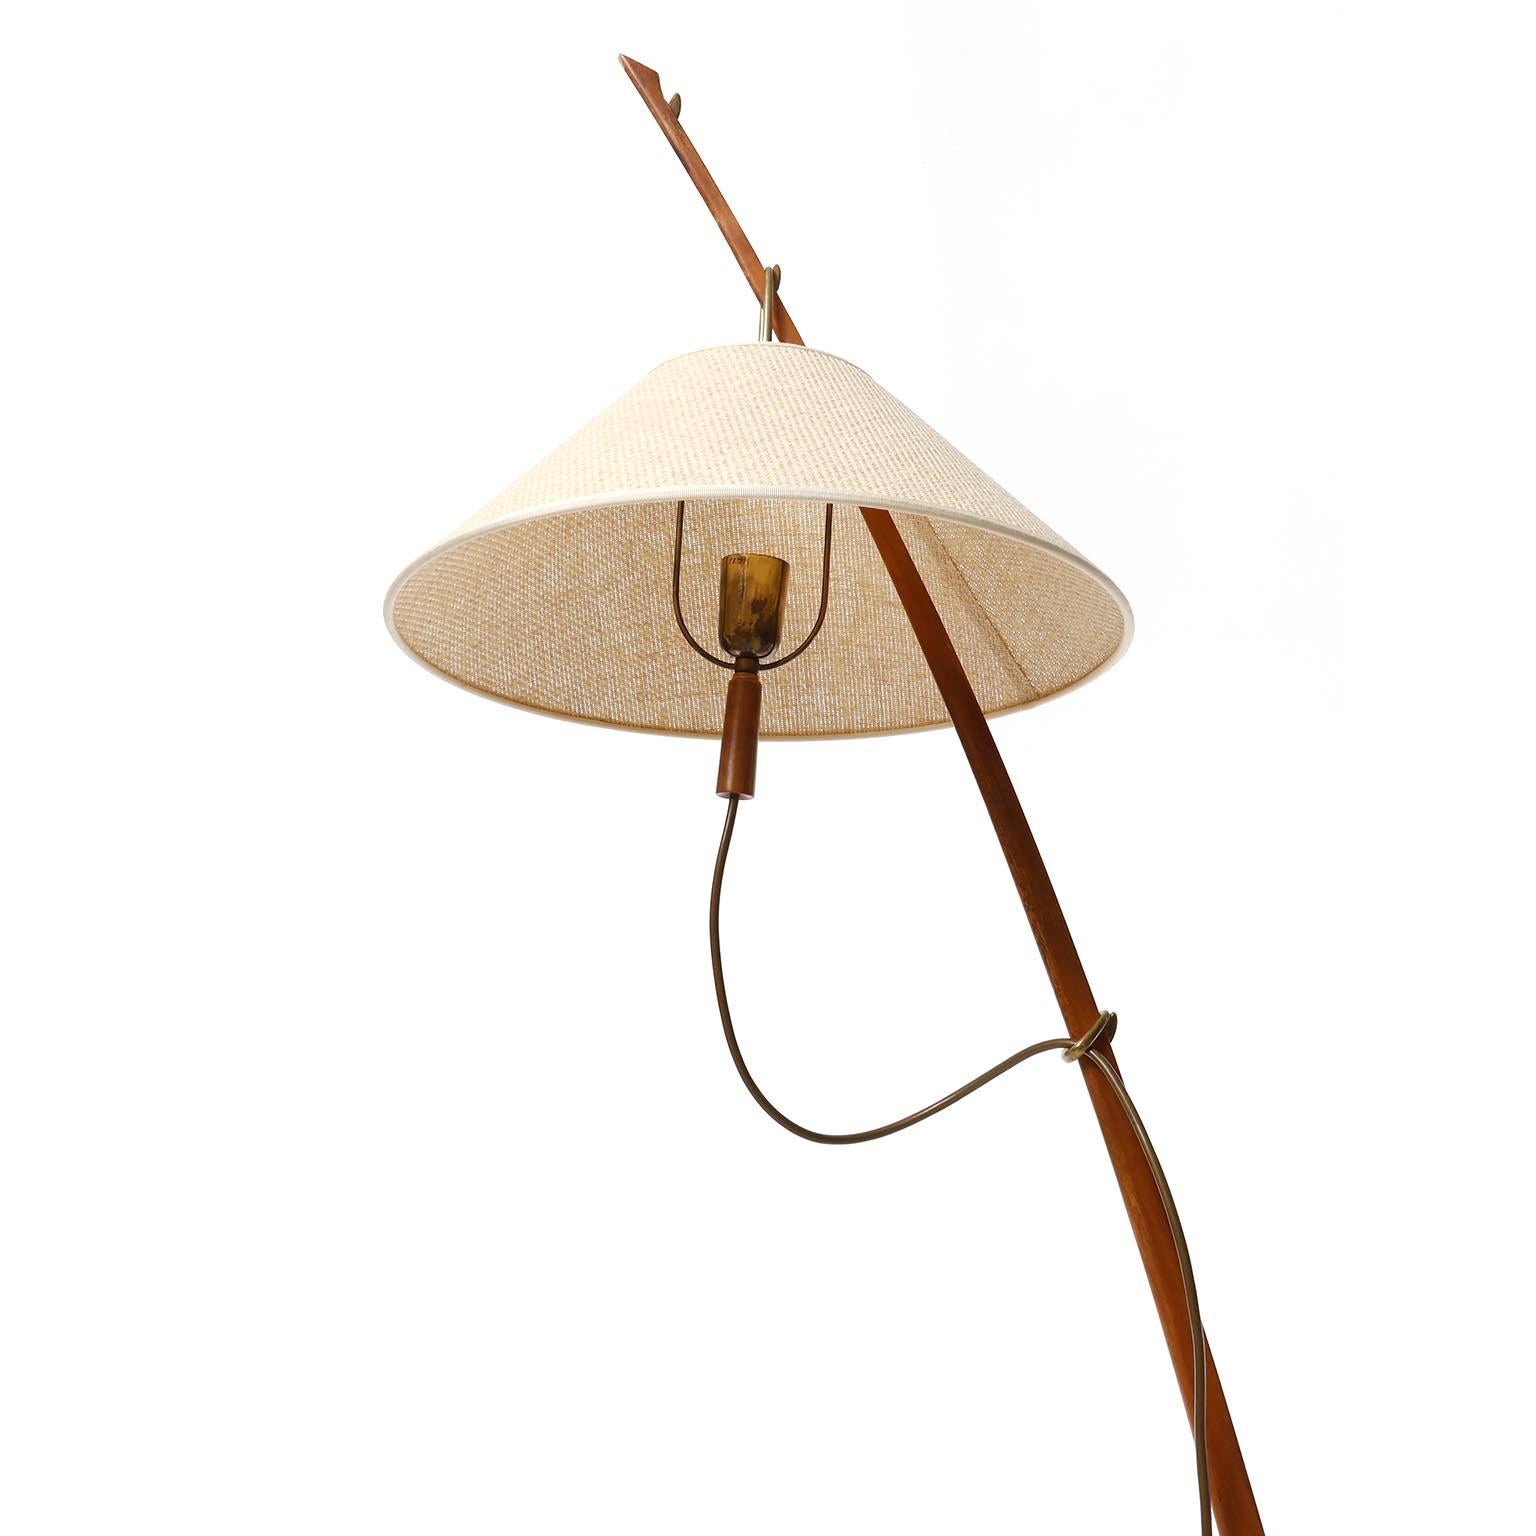 Floor Lamp 'Dornstab' No. 2076 by J.T. Kalmar, Patinated Brass Wood Cane, 1960 For Sale 2